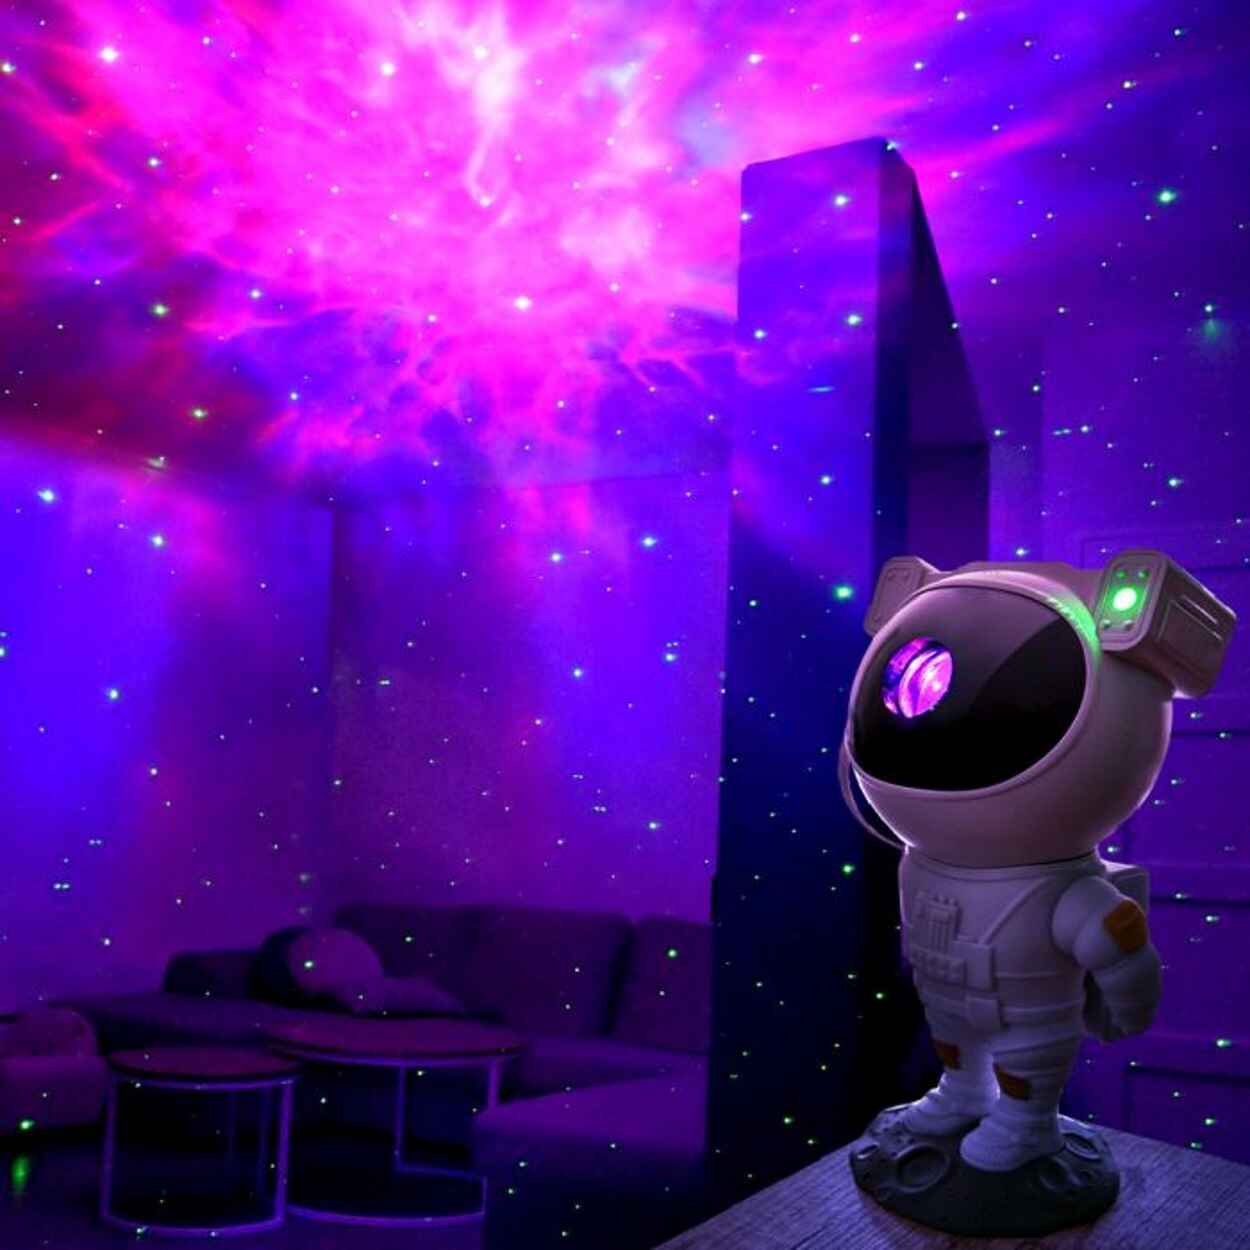 tophatter-electronics-astronaut-projector-online-shopping-galaxy-light